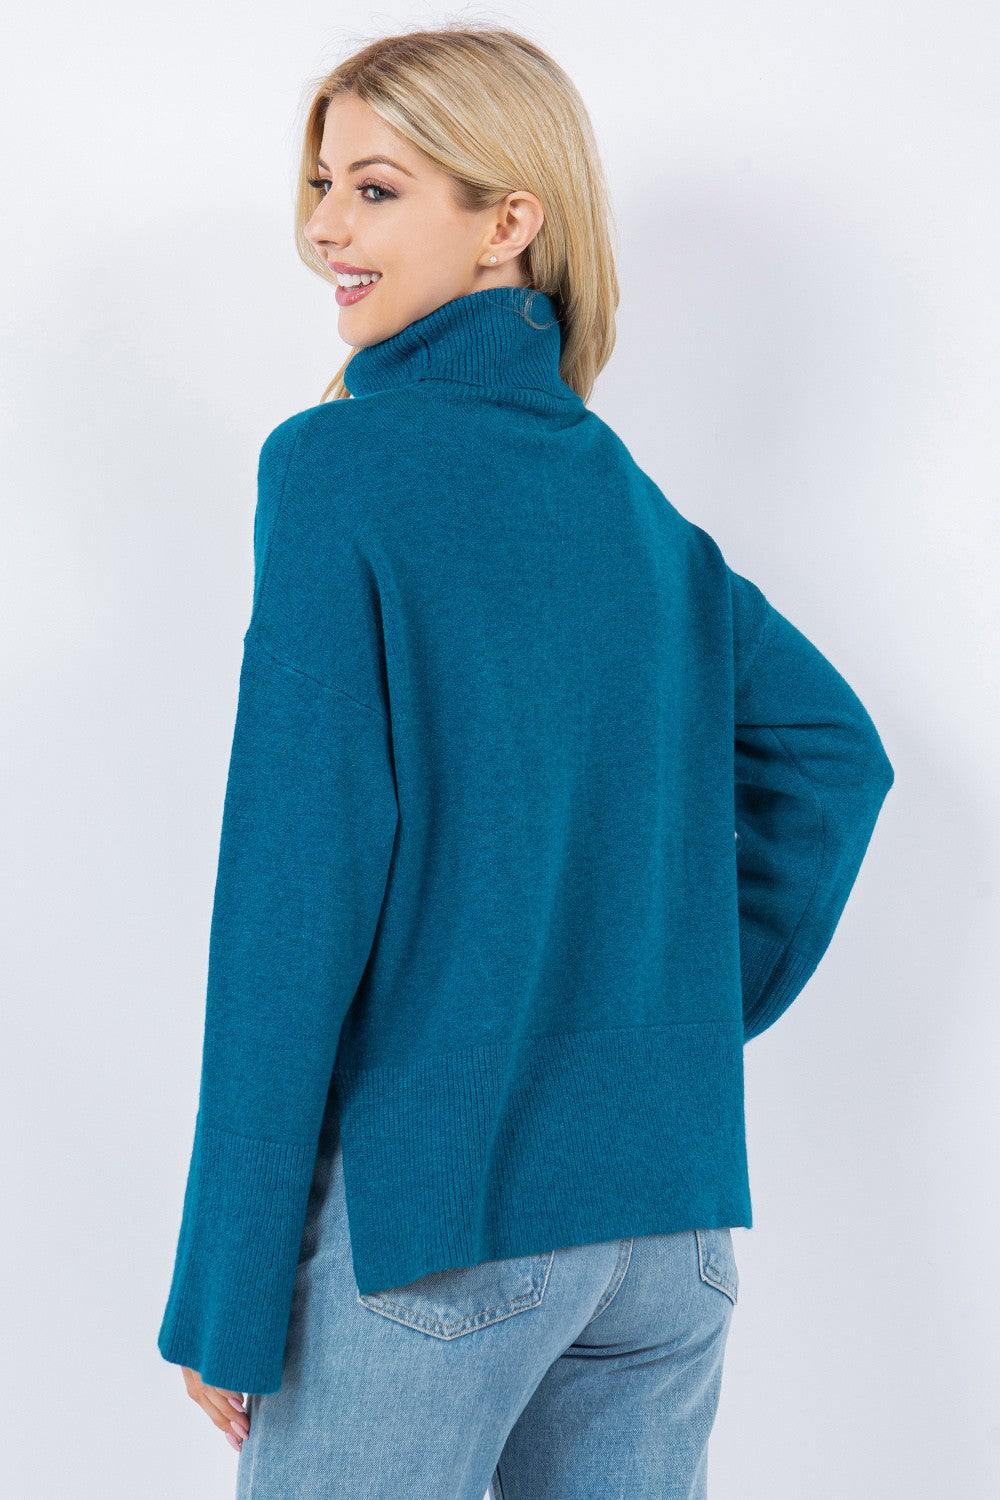 Turtle Neck Sweater lightweight houston texas womens boutique blue colorful